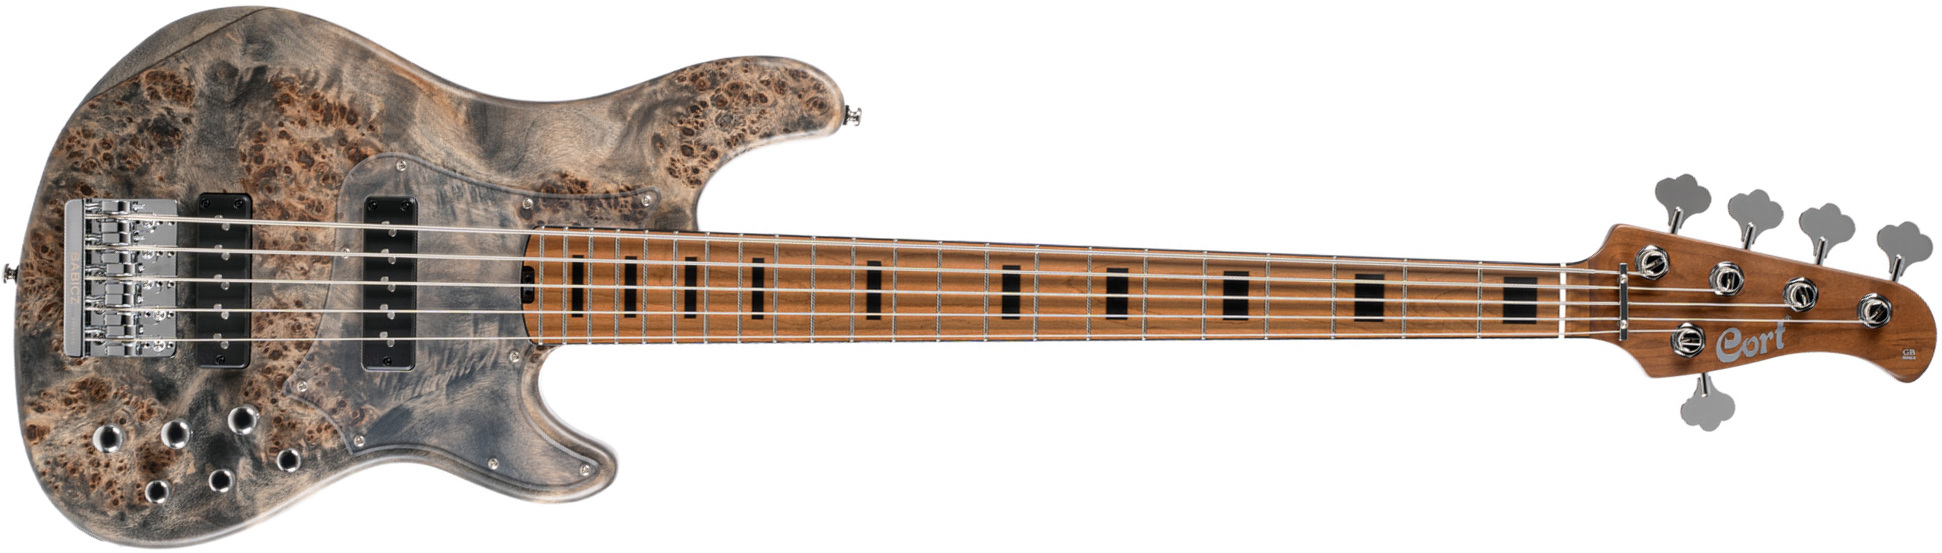 Cort Gb-modern 5c Active Mn - Open Pore Charcoal Gray - Solid body electric bass - Main picture